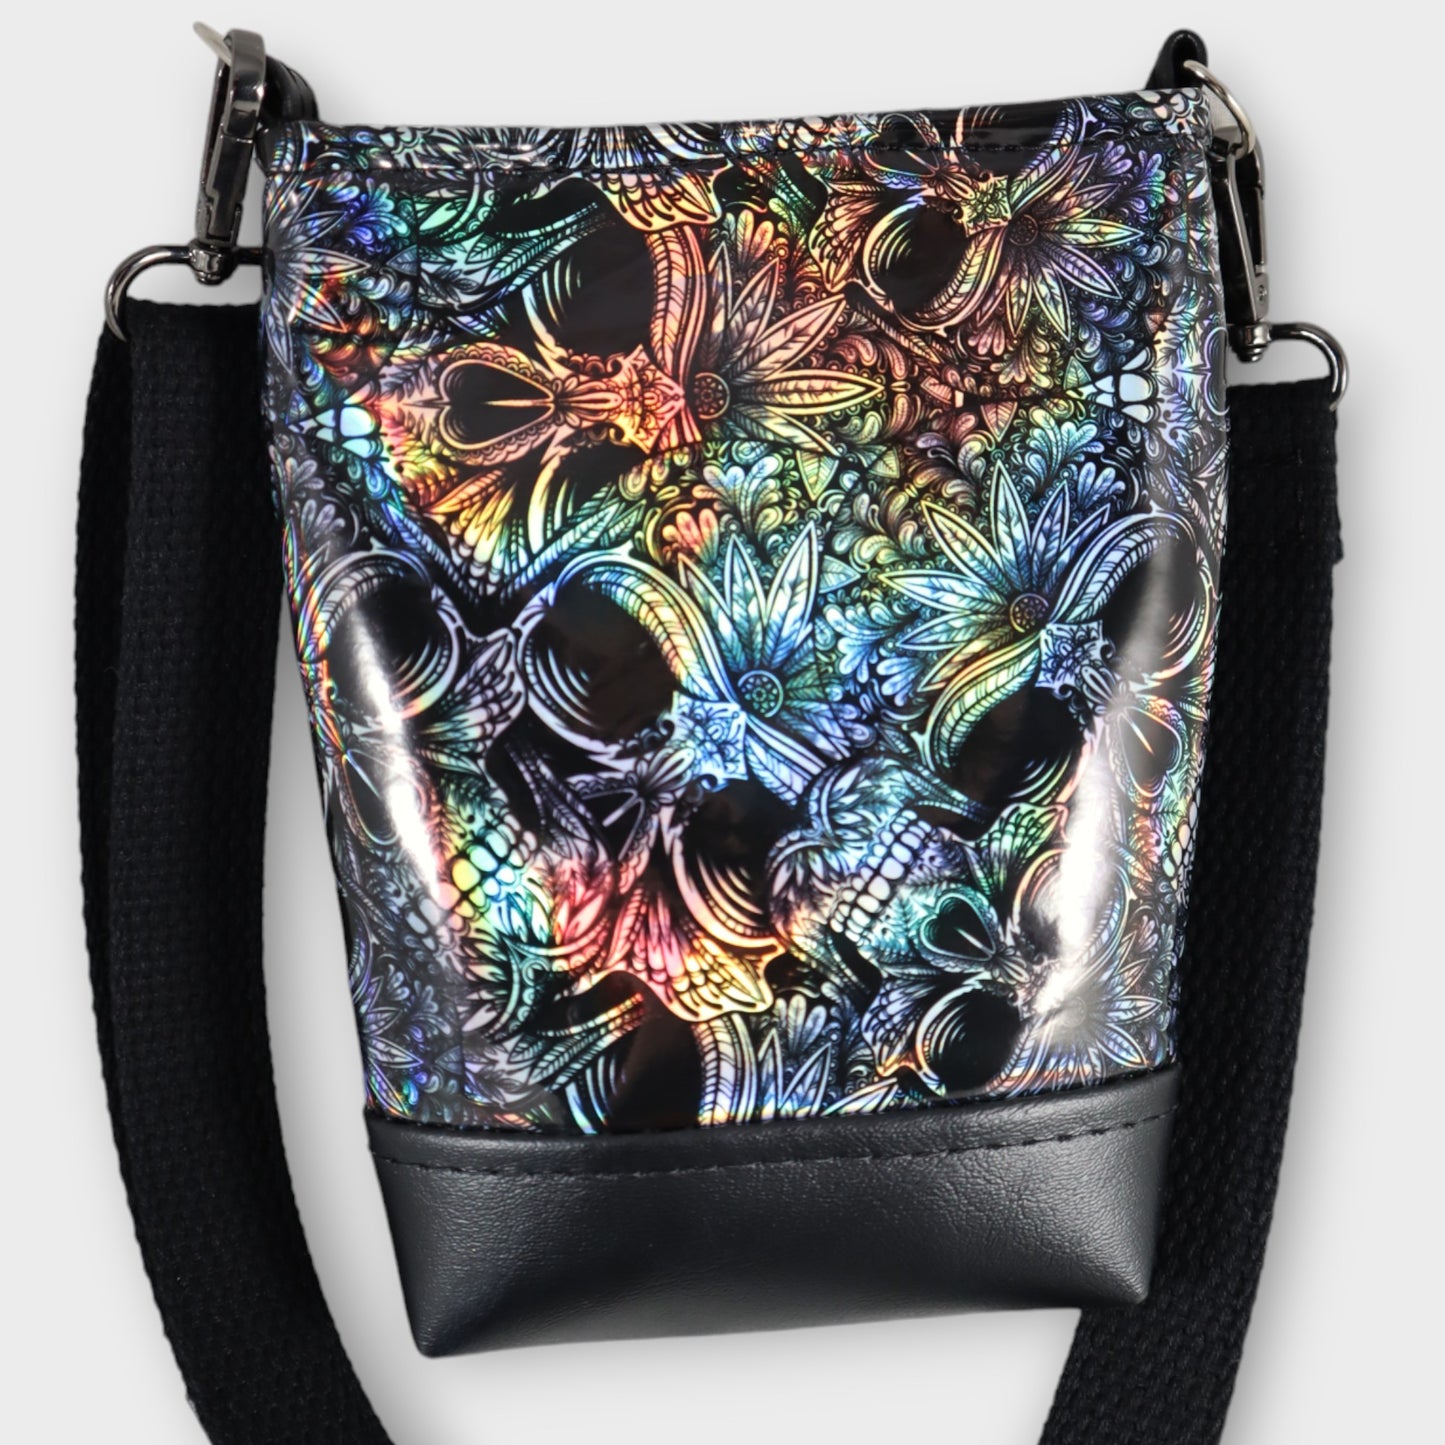 Handcrafted bag handbag small cell phone purse floral skulls holographic